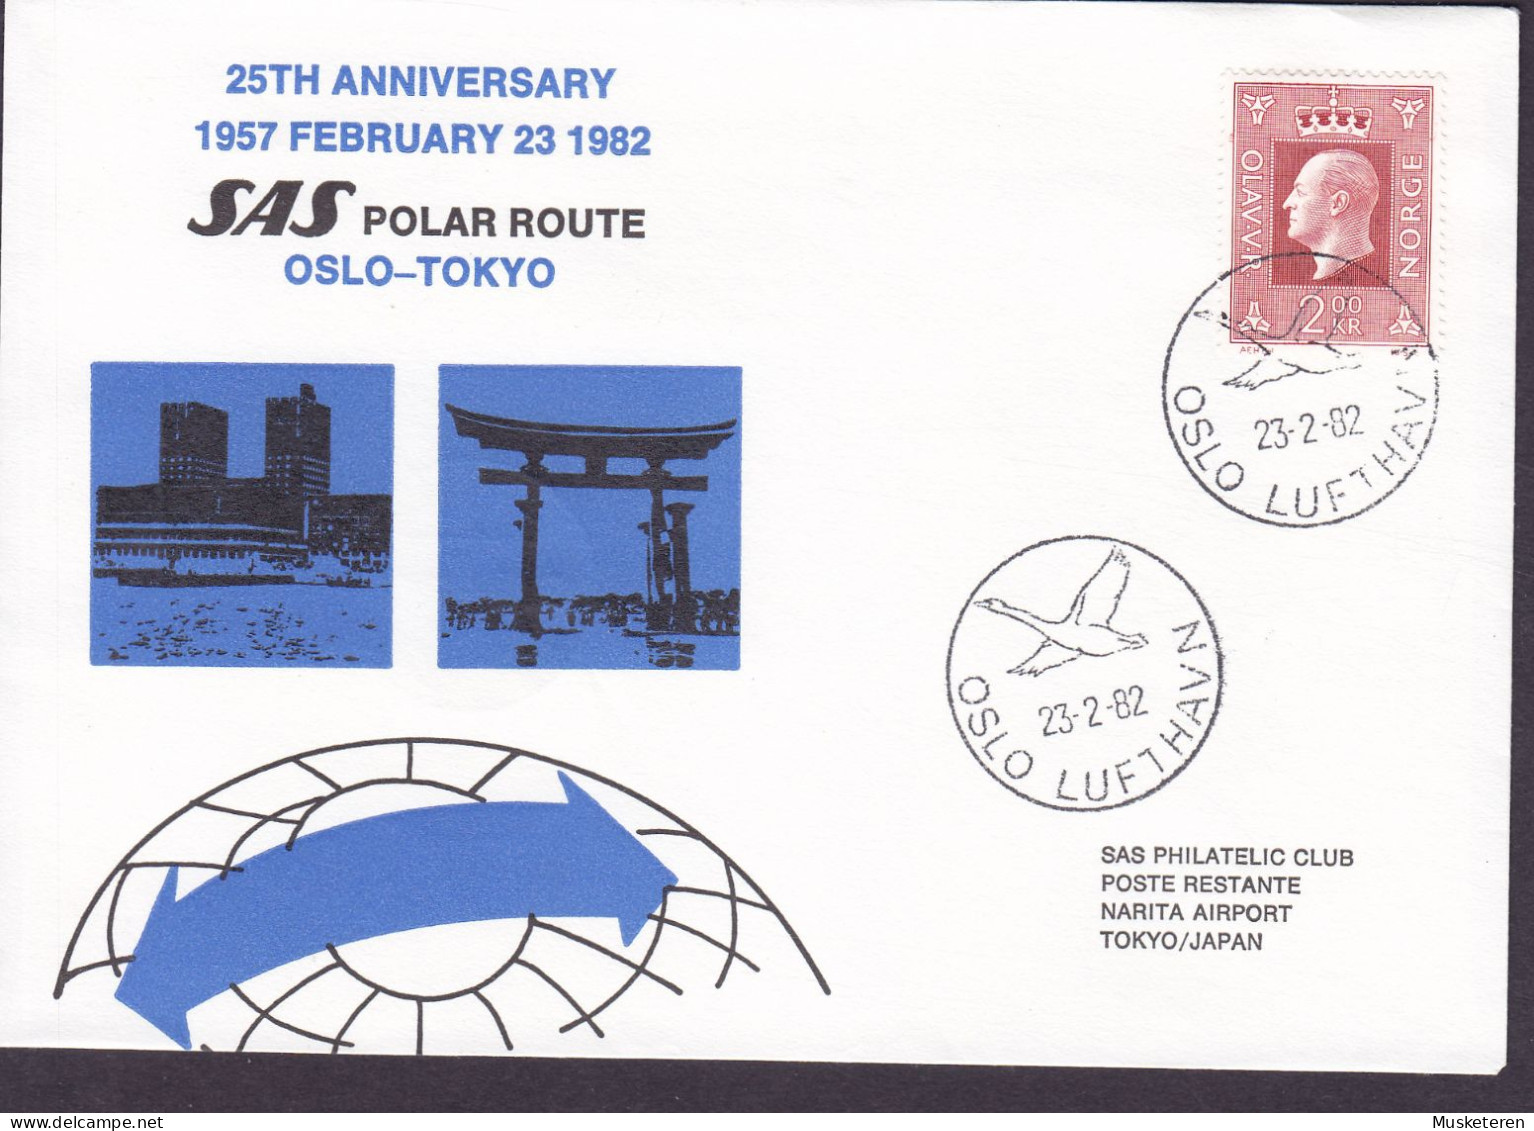 Norway SAS Polar Route Flight OSLO-TOKYO, OSLO LUFTHAVN 1982 Cover Brief Lettre - Covers & Documents